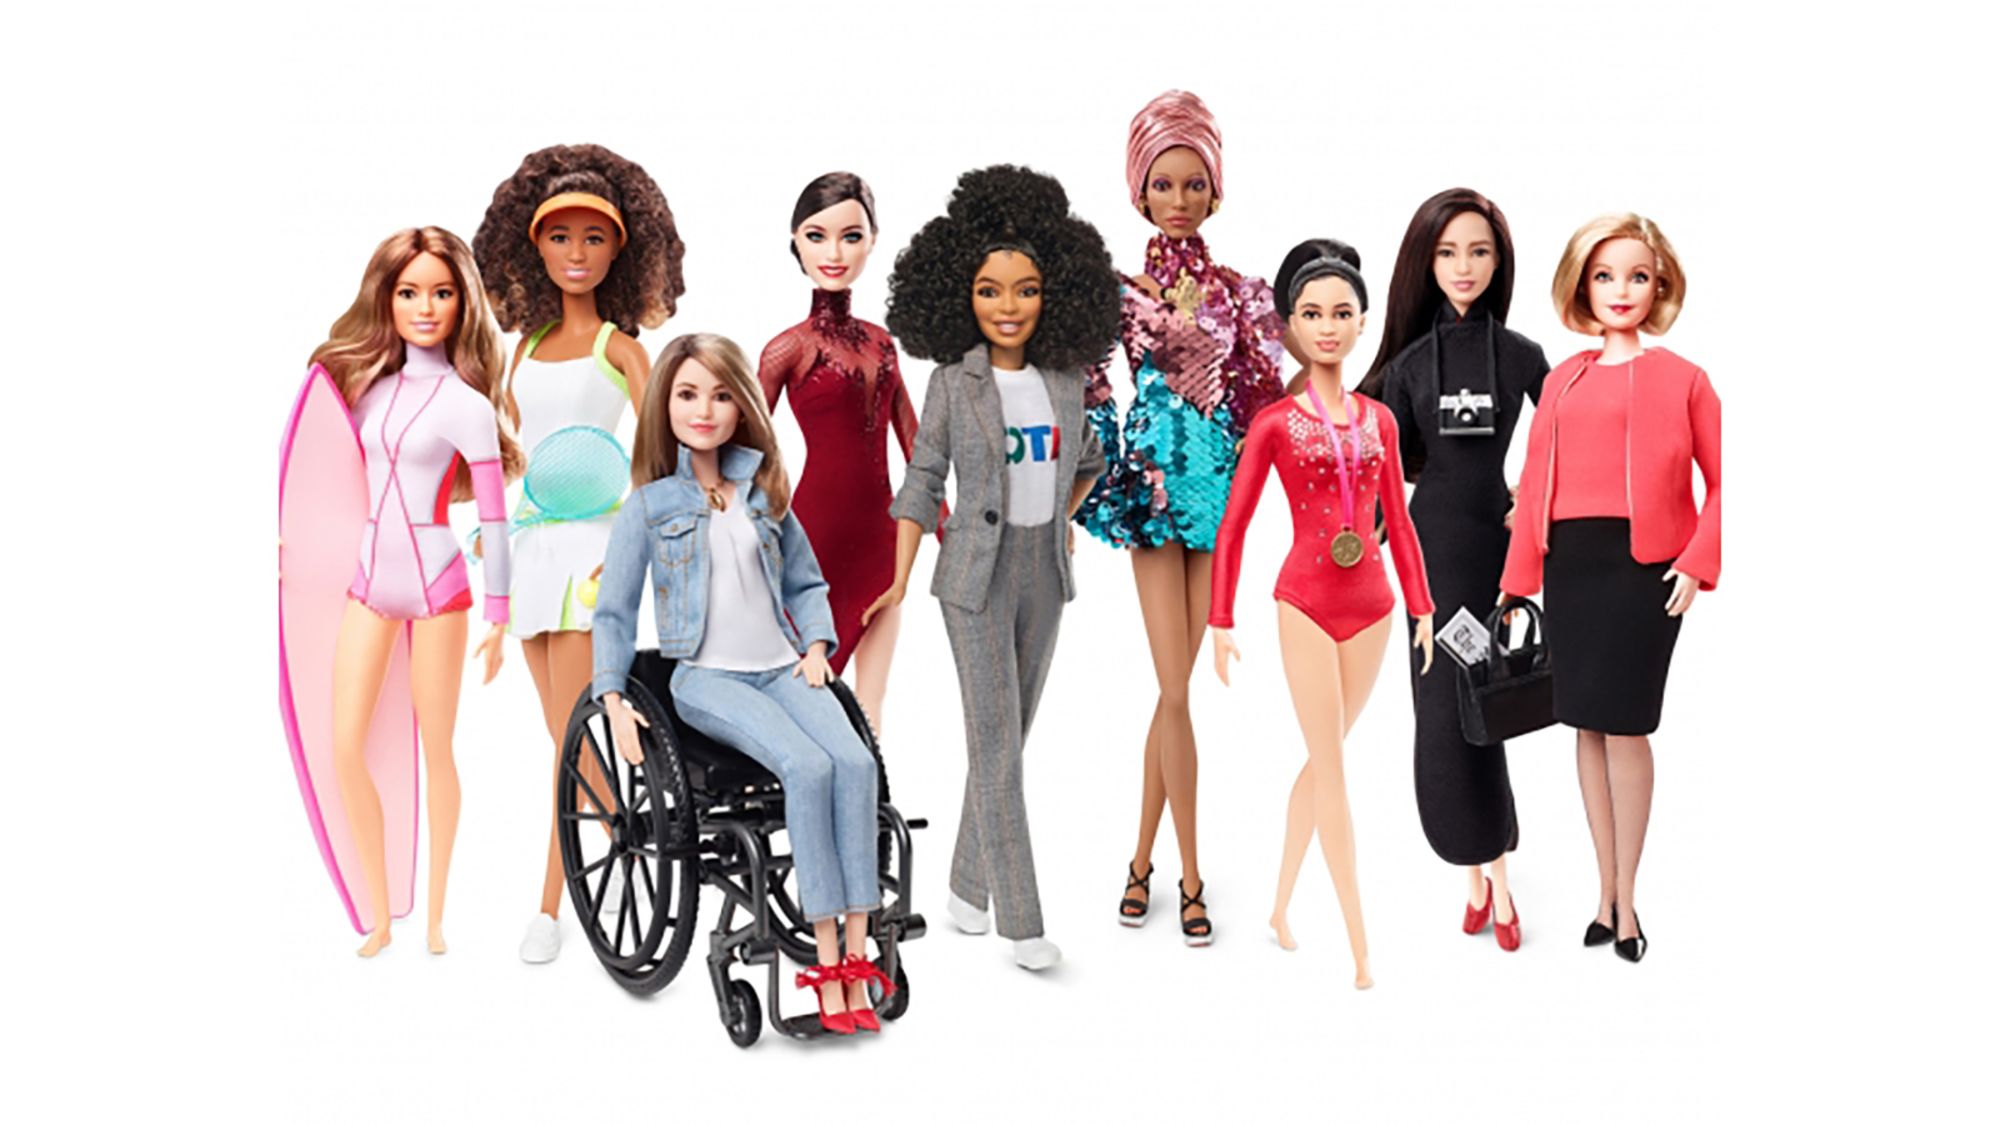 Ken doll turns 60: Barbie counterpart has changed a lot. See how